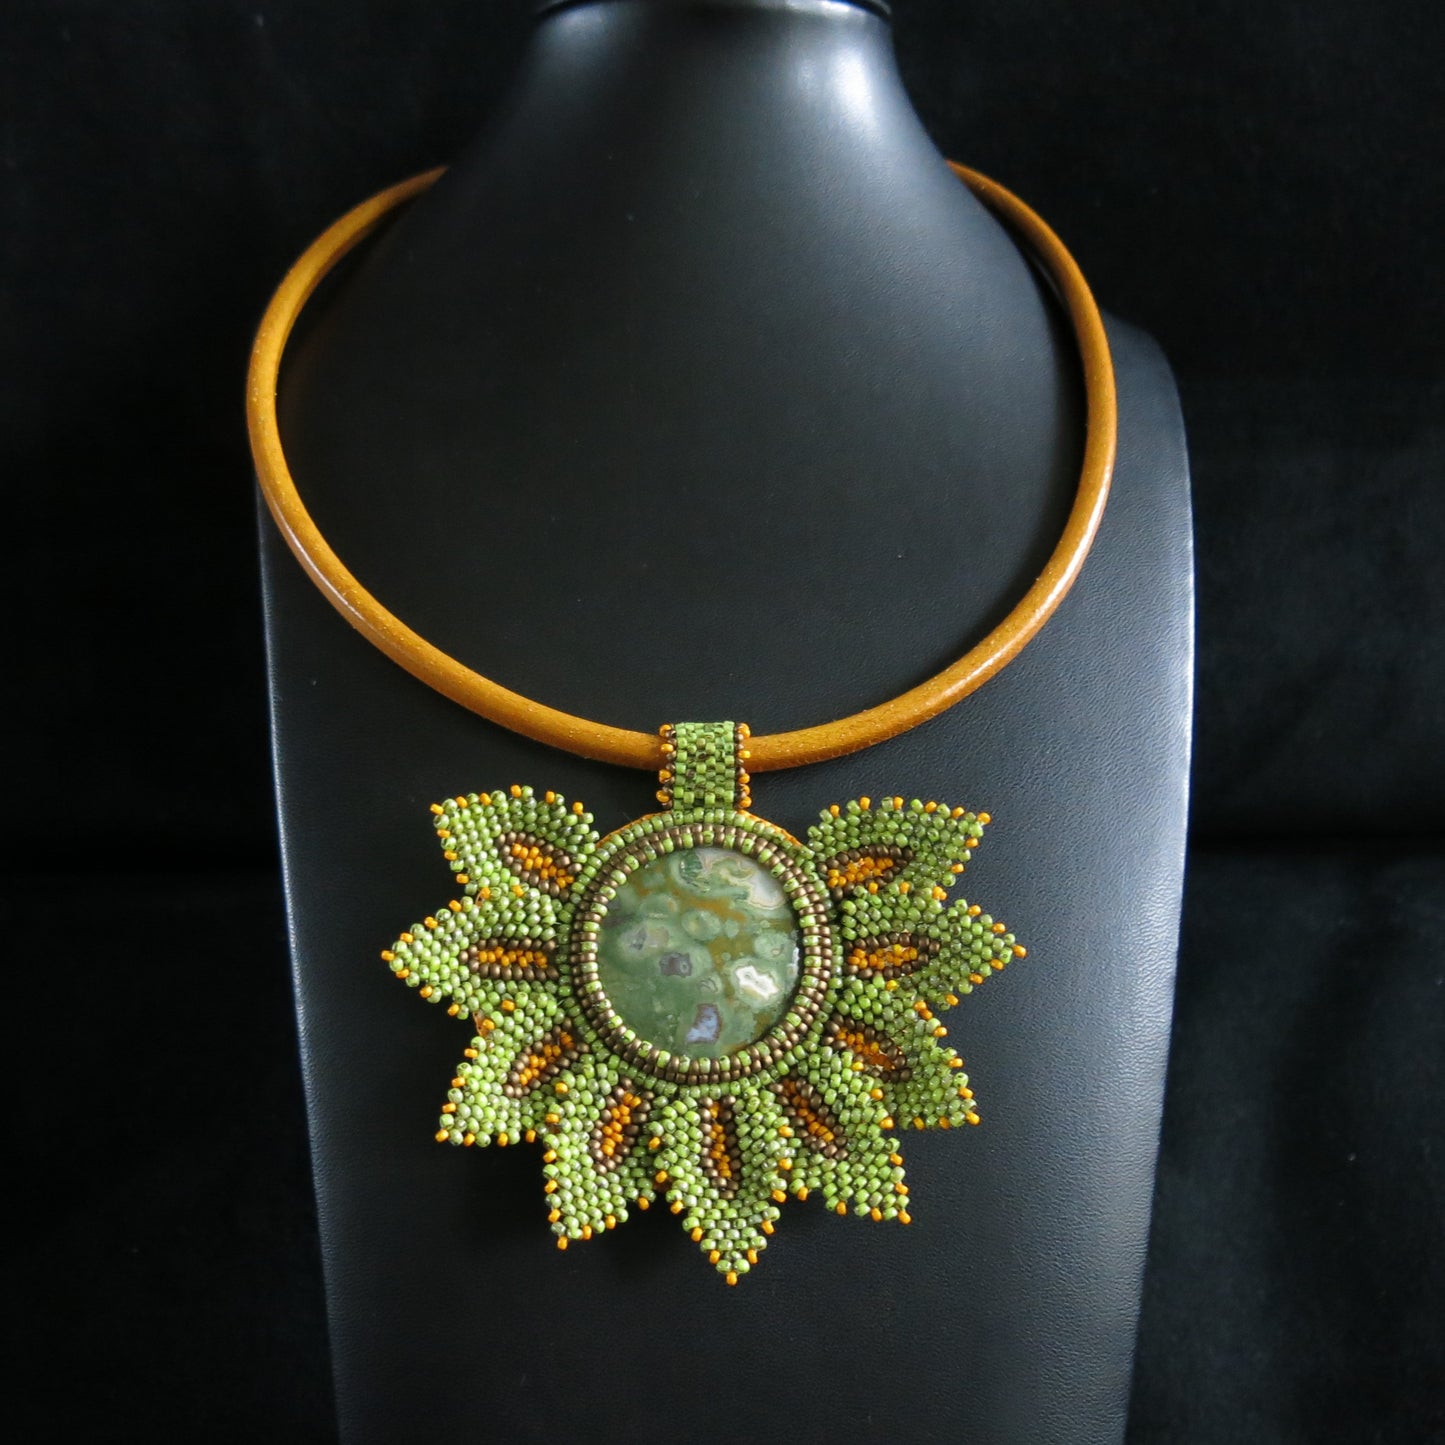 Embroidered necklace with rhyolite jasper